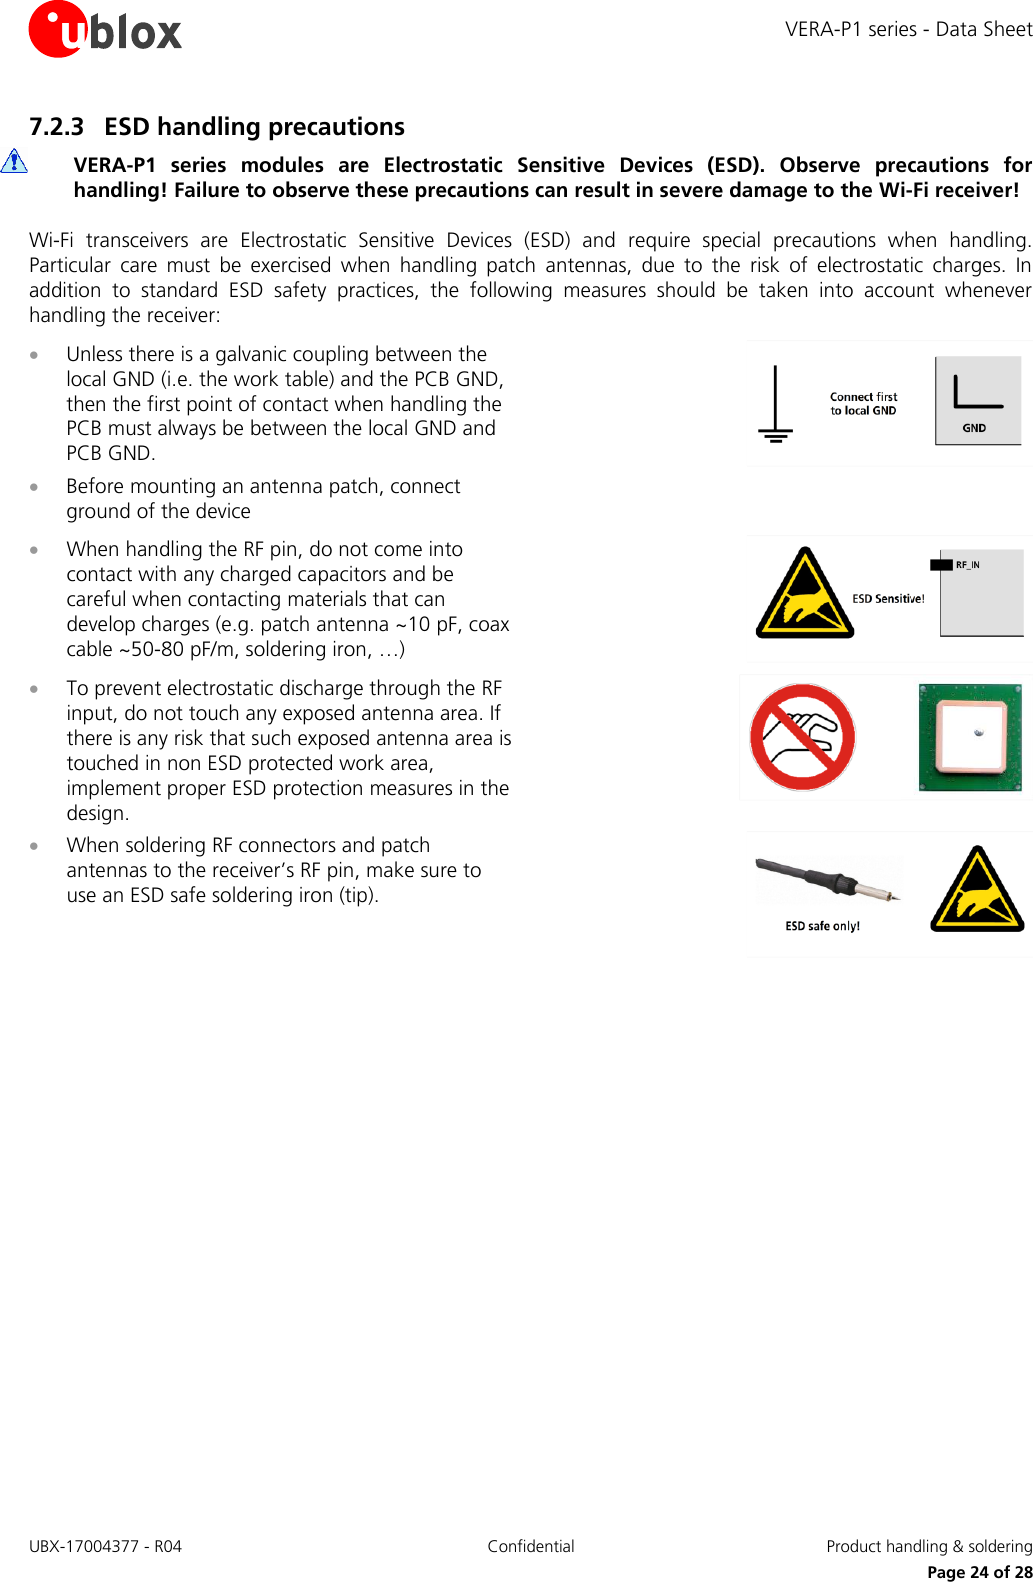 VERA-P1 series - Data Sheet UBX-17004377 - R04 Confidential  Product handling &amp; soldering     Page 24 of 28 7.2.3 ESD handling precautions  VERA-P1  series  modules  are  Electrostatic  Sensitive  Devices  (ESD).  Observe  precautions  for handling! Failure to observe these precautions can result in severe damage to the Wi-Fi receiver! Wi-Fi  transceivers  are  Electrostatic  Sensitive  Devices  (ESD)  and  require  special  precautions  when  handling. Particular  care  must  be  exercised  when  handling  patch  antennas,  due  to  the  risk  of  electrostatic  charges.  In addition  to  standard  ESD  safety  practices,  the  following  measures  should  be  taken  into  account  whenever handling the receiver:  Unless there is a galvanic coupling between the local GND (i.e. the work table) and the PCB GND, then the first point of contact when handling the PCB must always be between the local GND and PCB GND.  Before mounting an antenna patch, connect ground of the device   When handling the RF pin, do not come into contact with any charged capacitors and be careful when contacting materials that can develop charges (e.g. patch antenna ~10 pF, coax cable ~50-80 pF/m, soldering iron, …)   To prevent electrostatic discharge through the RF input, do not touch any exposed antenna area. If there is any risk that such exposed antenna area is touched in non ESD protected work area, implement proper ESD protection measures in the design.   When soldering RF connectors and patch antennas to the receiver’s RF pin, make sure to use an ESD safe soldering iron (tip).   